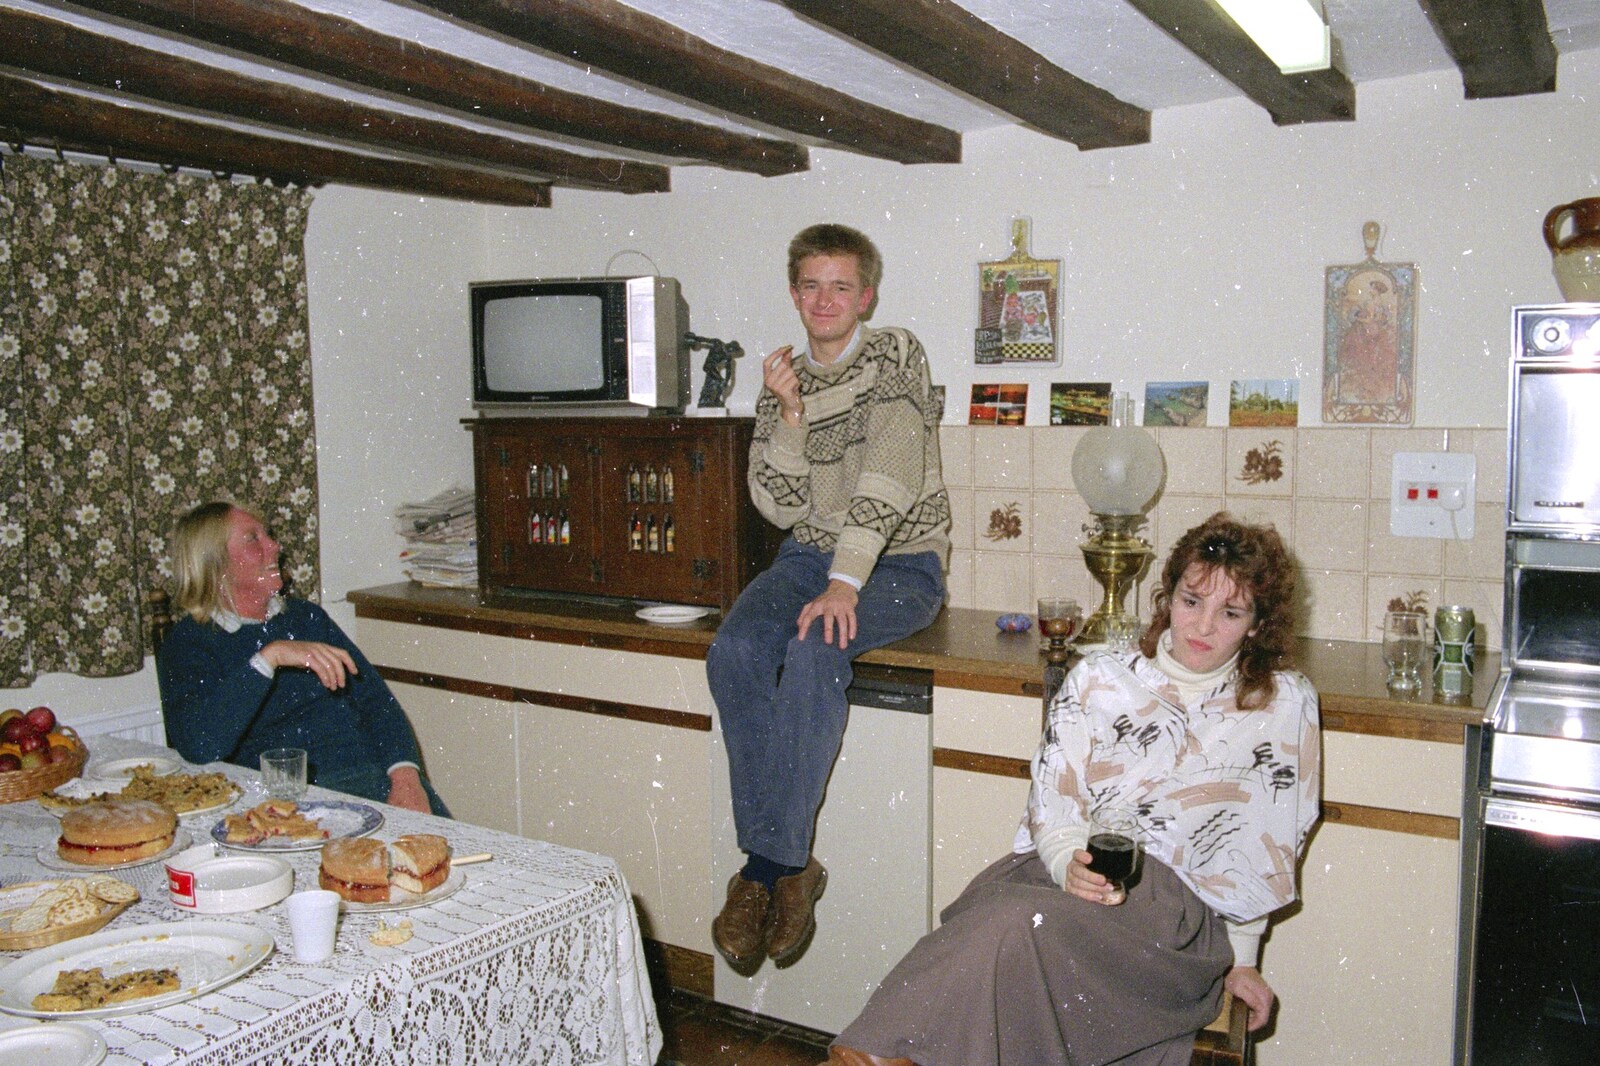 Nosher is perched up on the worktop from A Stuston Bonfire Night, Suffolk - 5th November 1989